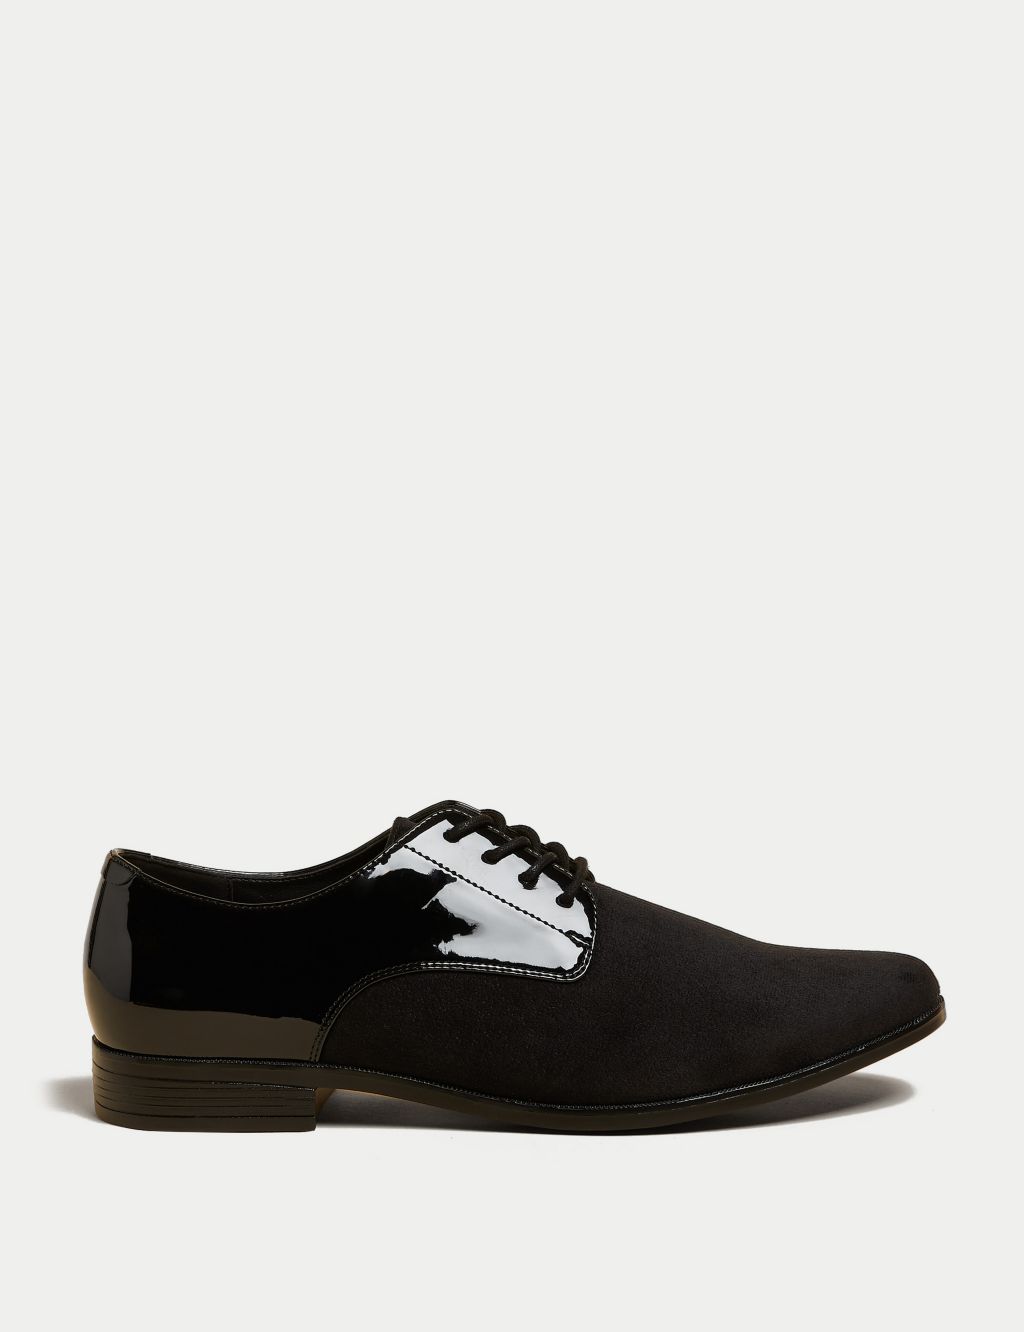 Velvet and Patent Derby Shoes image 1